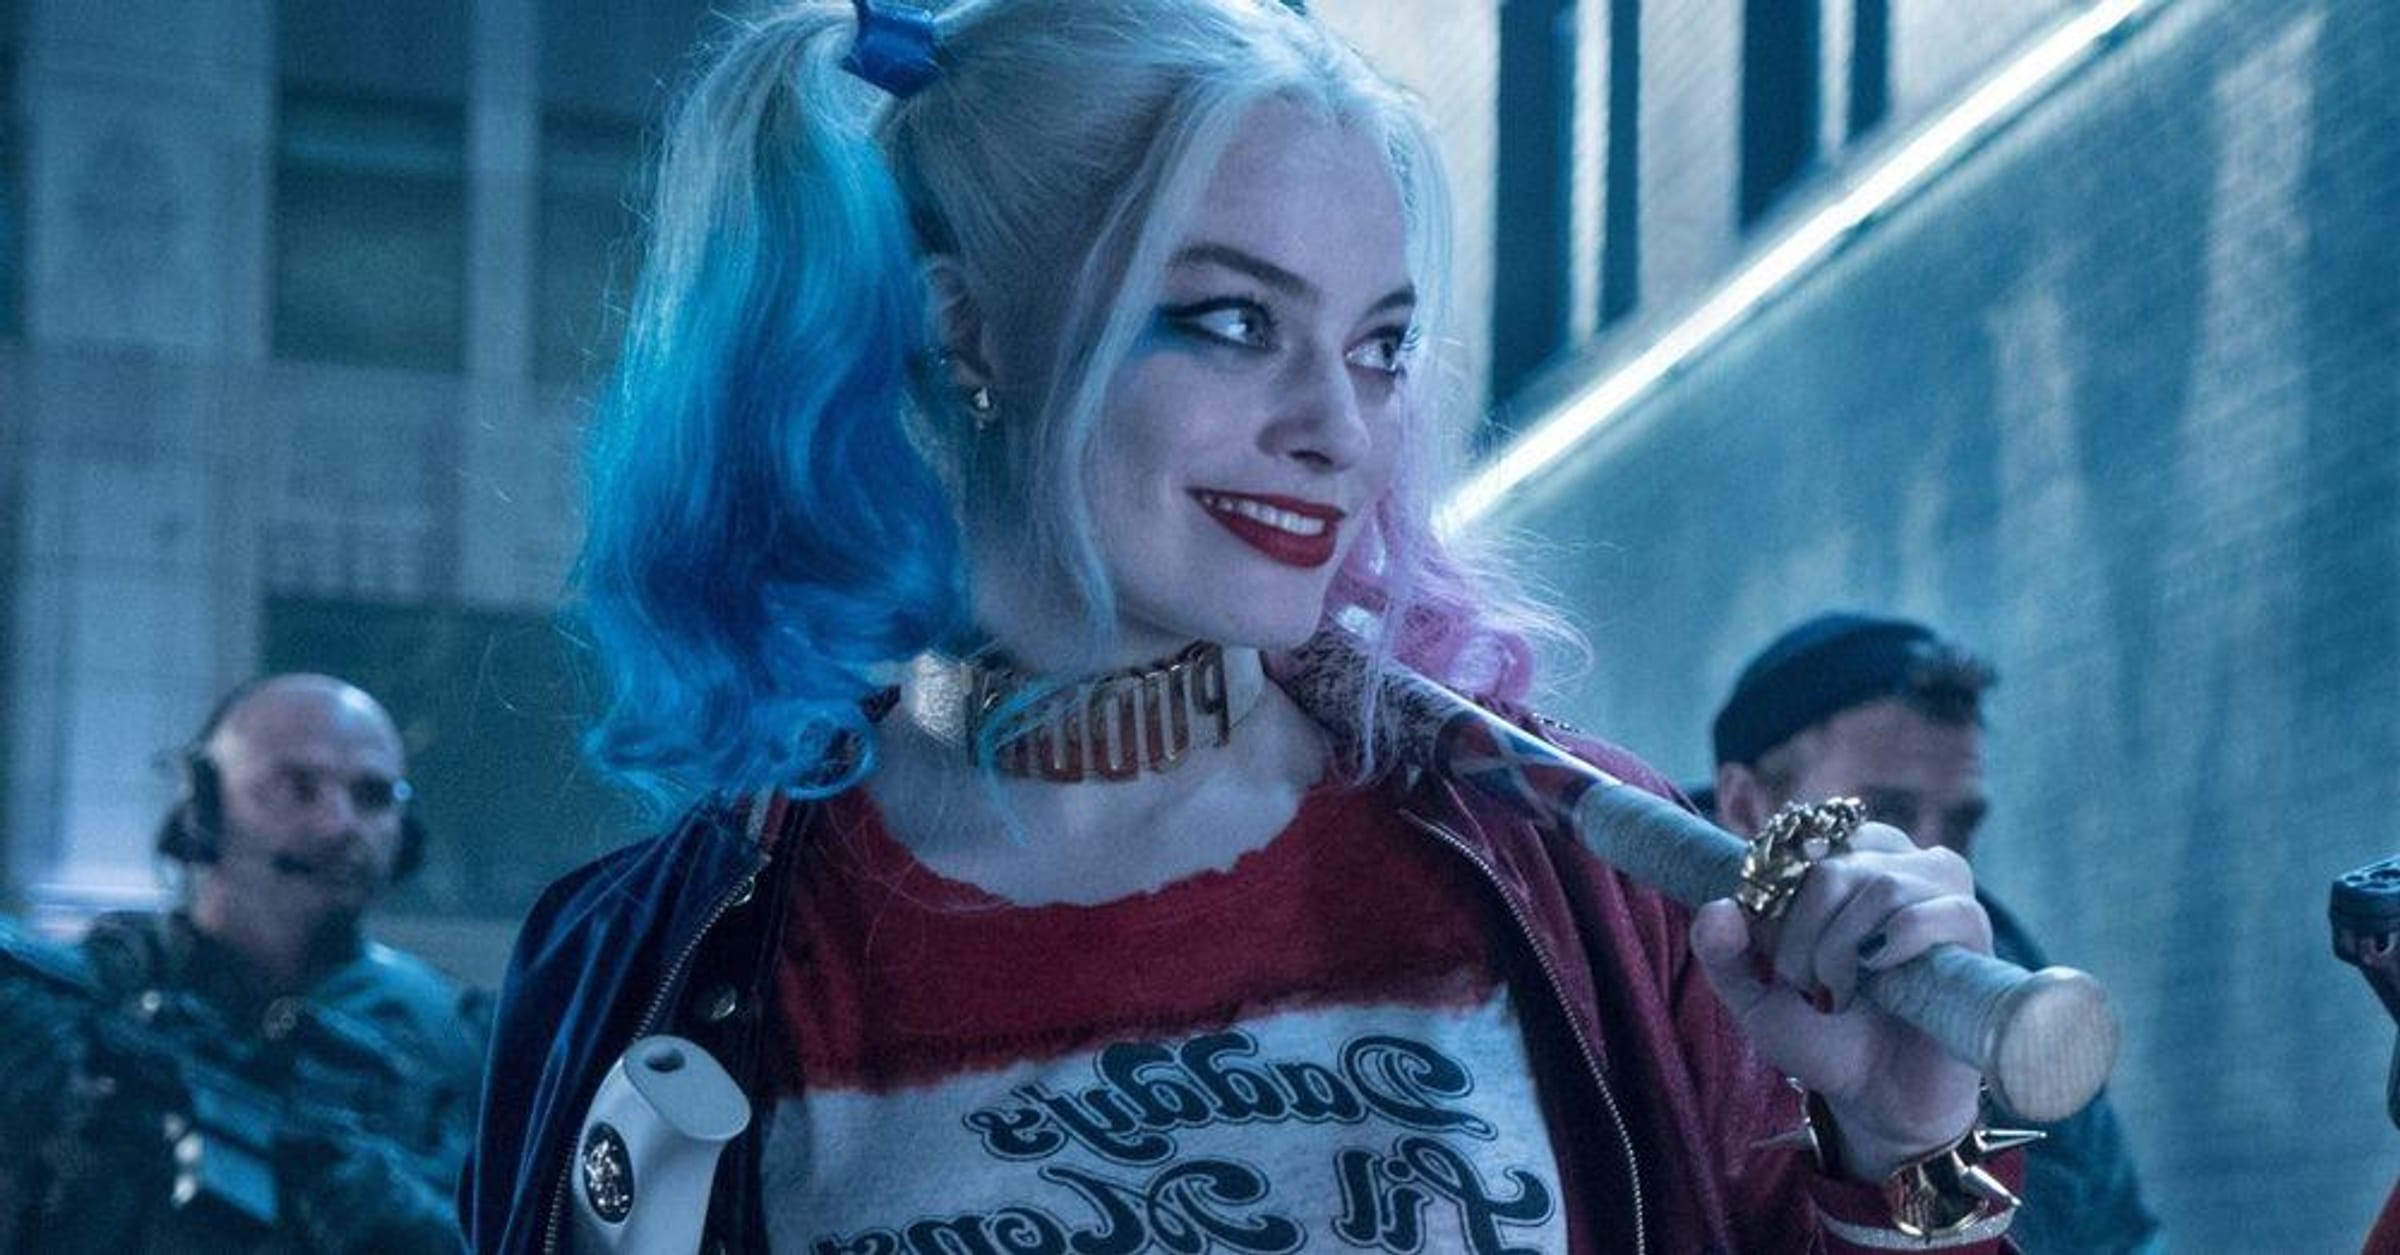 Everything We Know About THE SUICIDE SQUAD - Nerdist